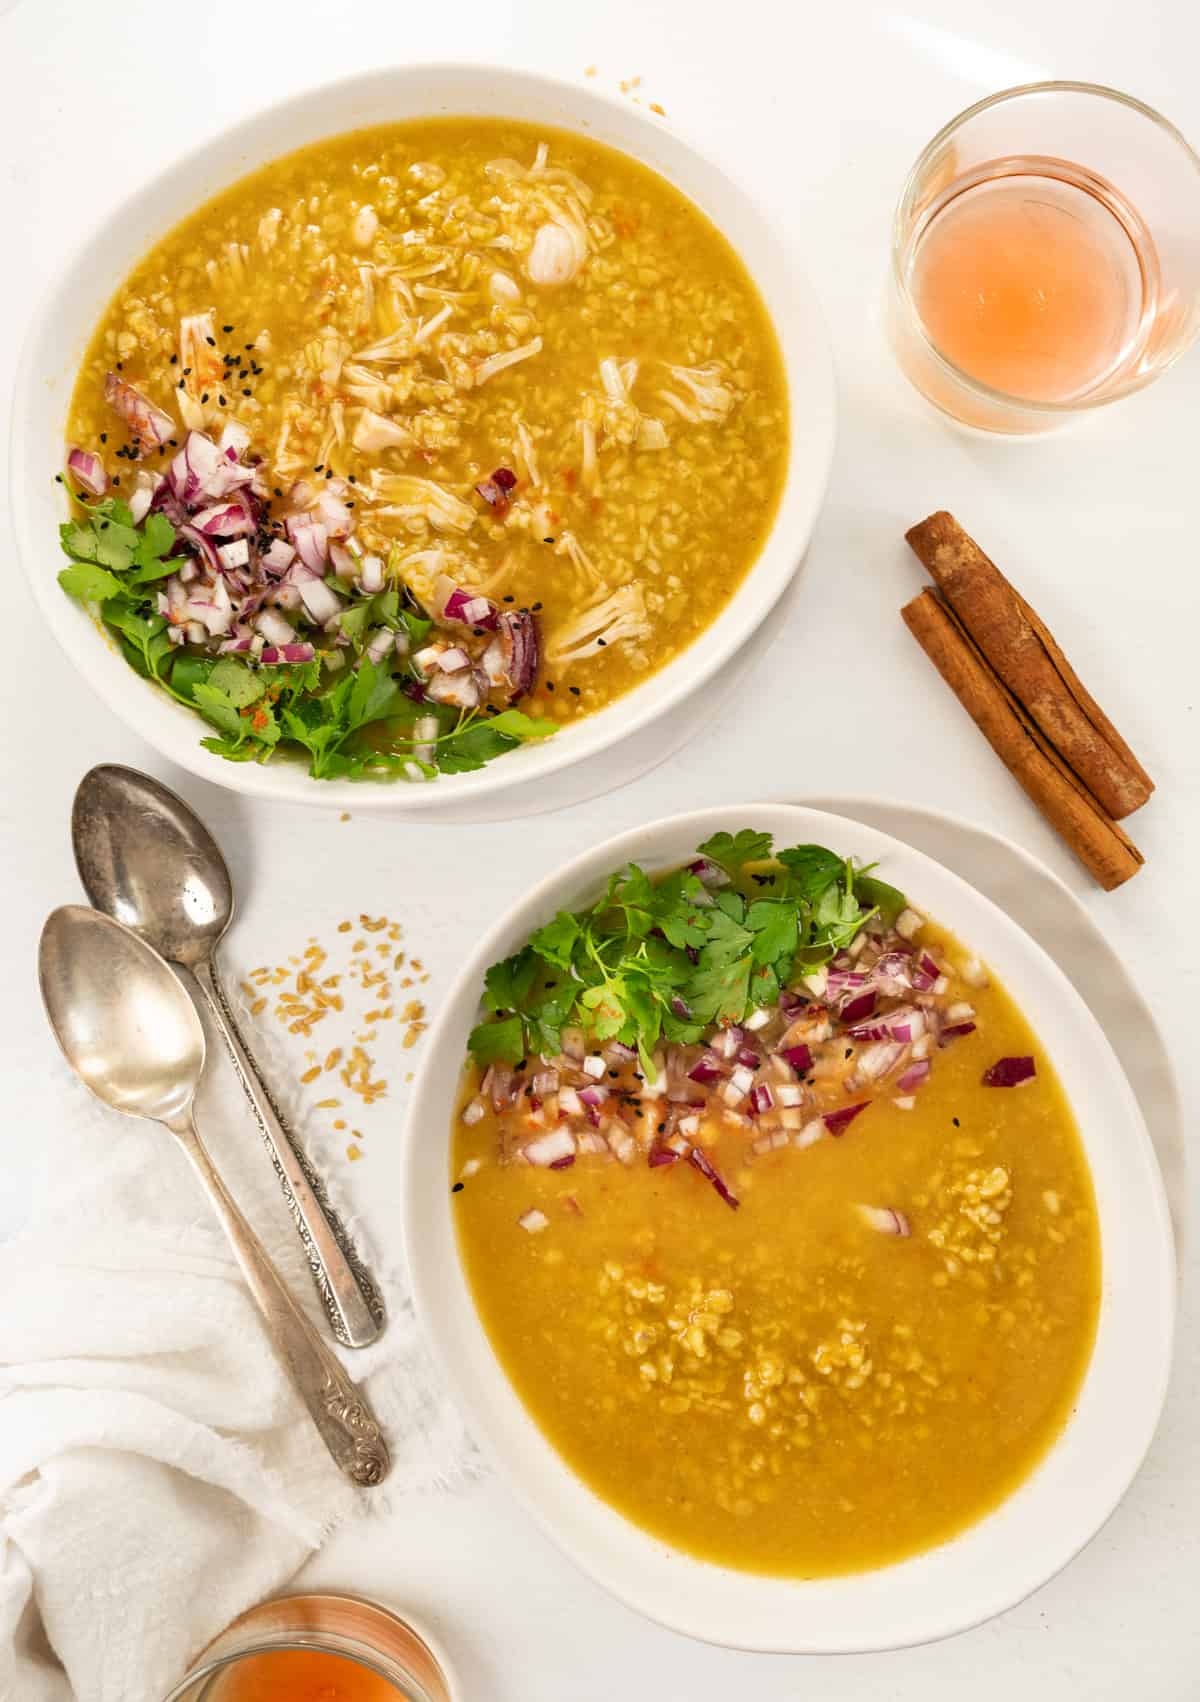 two bowls of thick yellow grain soup garnished with green herbs and diced red onion